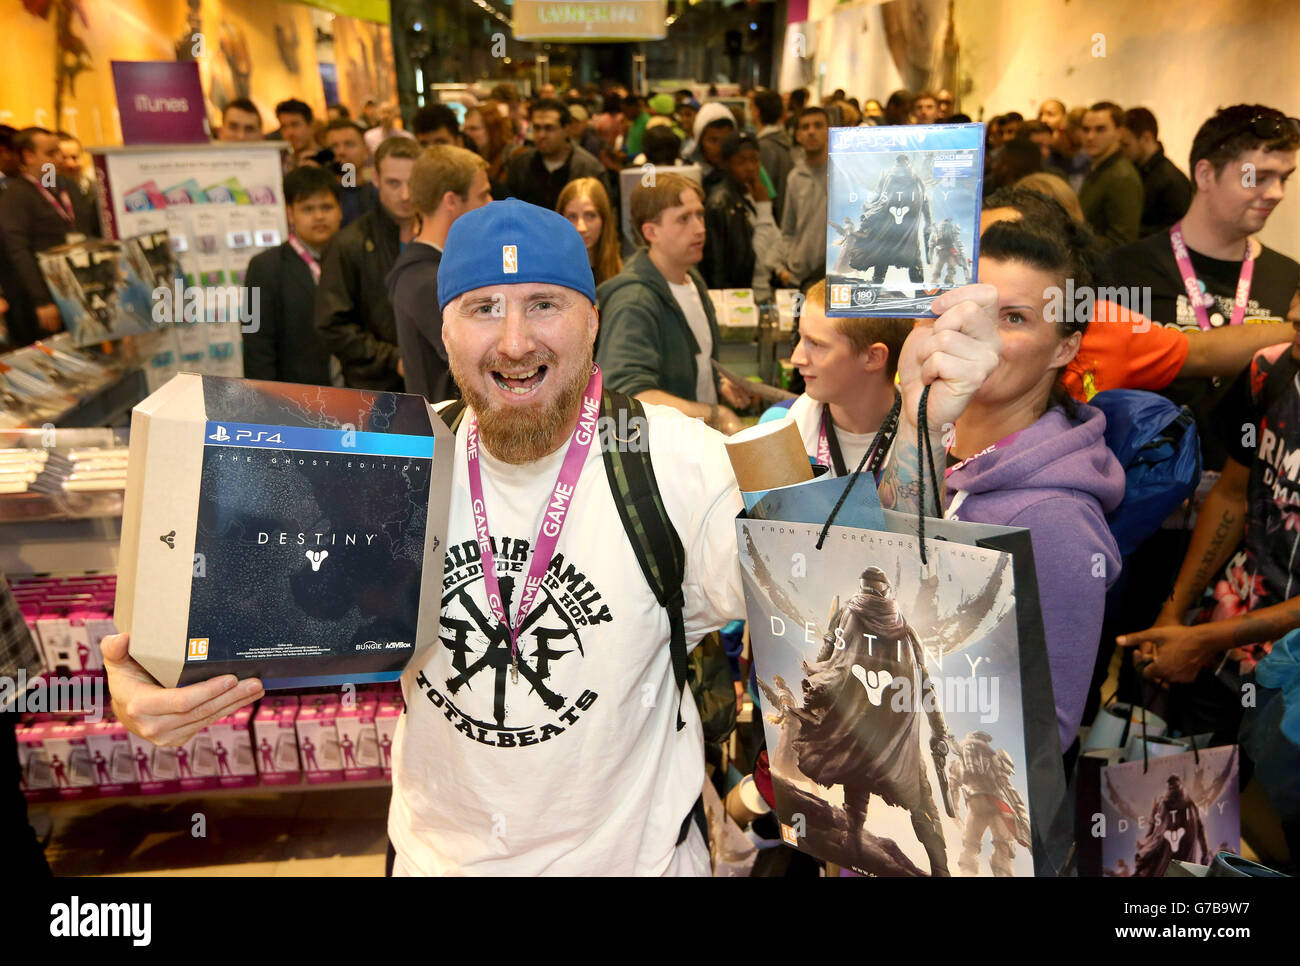 EDITORIAL USE ONLY Csaba Toth, 38 from Wood Green North London is the first person to pick up Destiny, the latest game from the creators of Halo, after its midnight release at GAME in Westfield Stratford City in London. PRESS ASSOCIATION Picture date: Monday September 8, 2014. Photo credit should read: Matt Alexander/PA Stock Photo